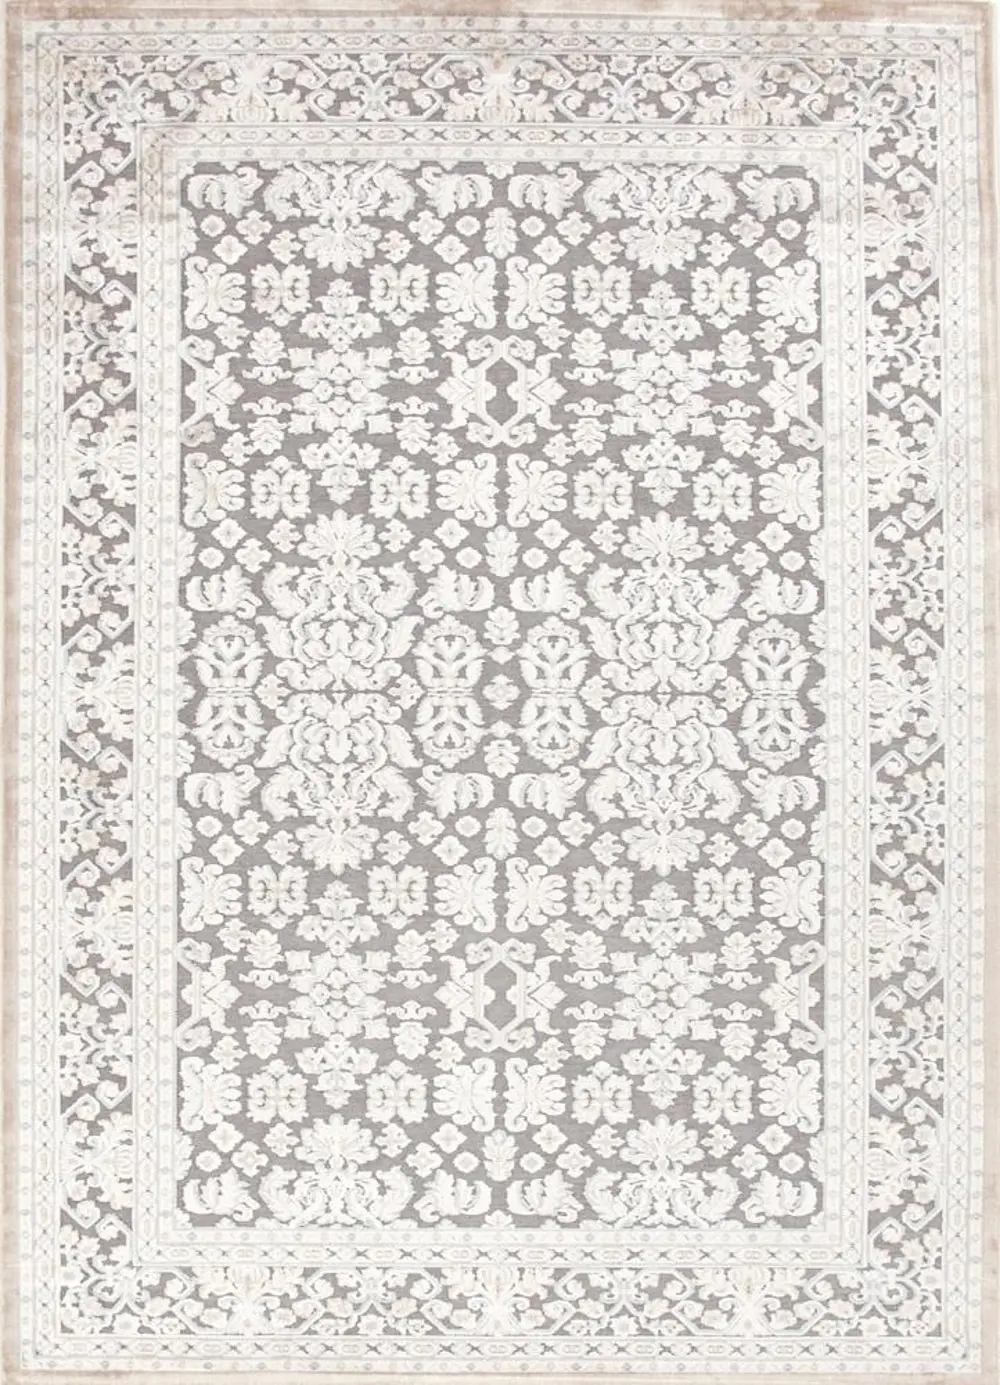 5 x 8 Medium Transitional Gray Area Rug - Fables-1